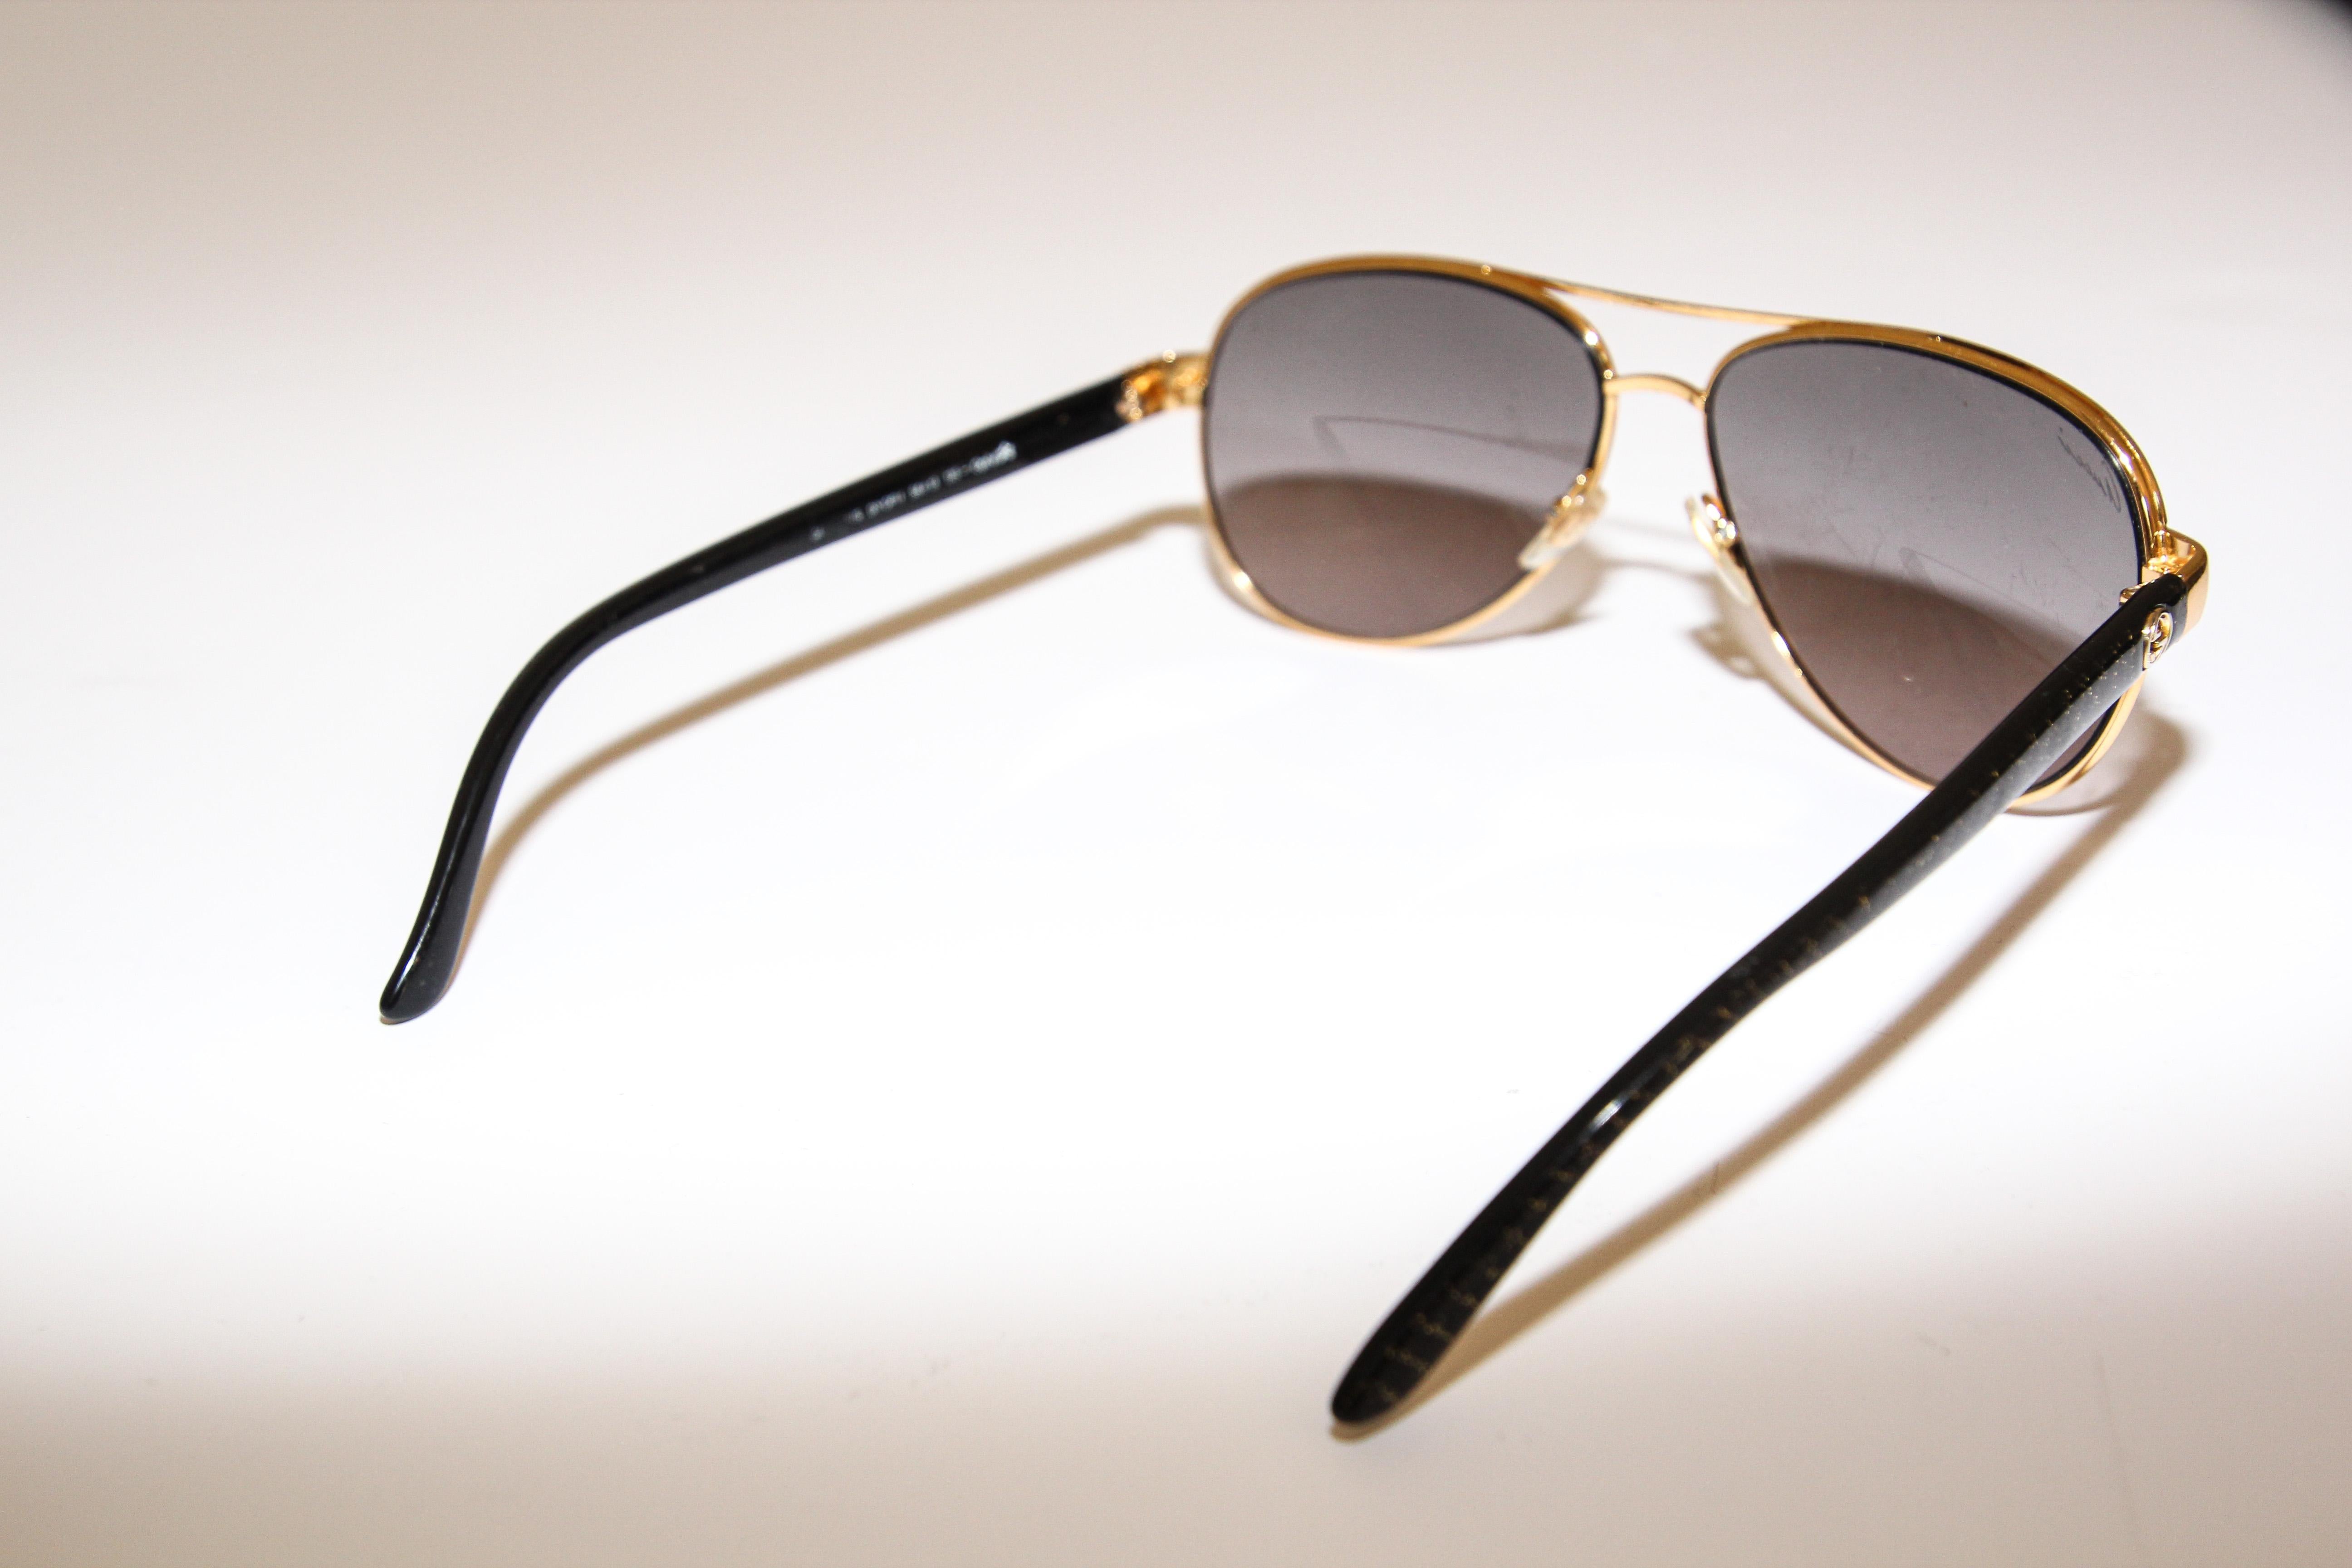 Vintage Gucci Aviator sunglasses 1990's Made in Italy
Gucci's in gilded gold hardware sunglasses with logo GG on temple.
This item could show minor sign of wear.
Made in Italy.